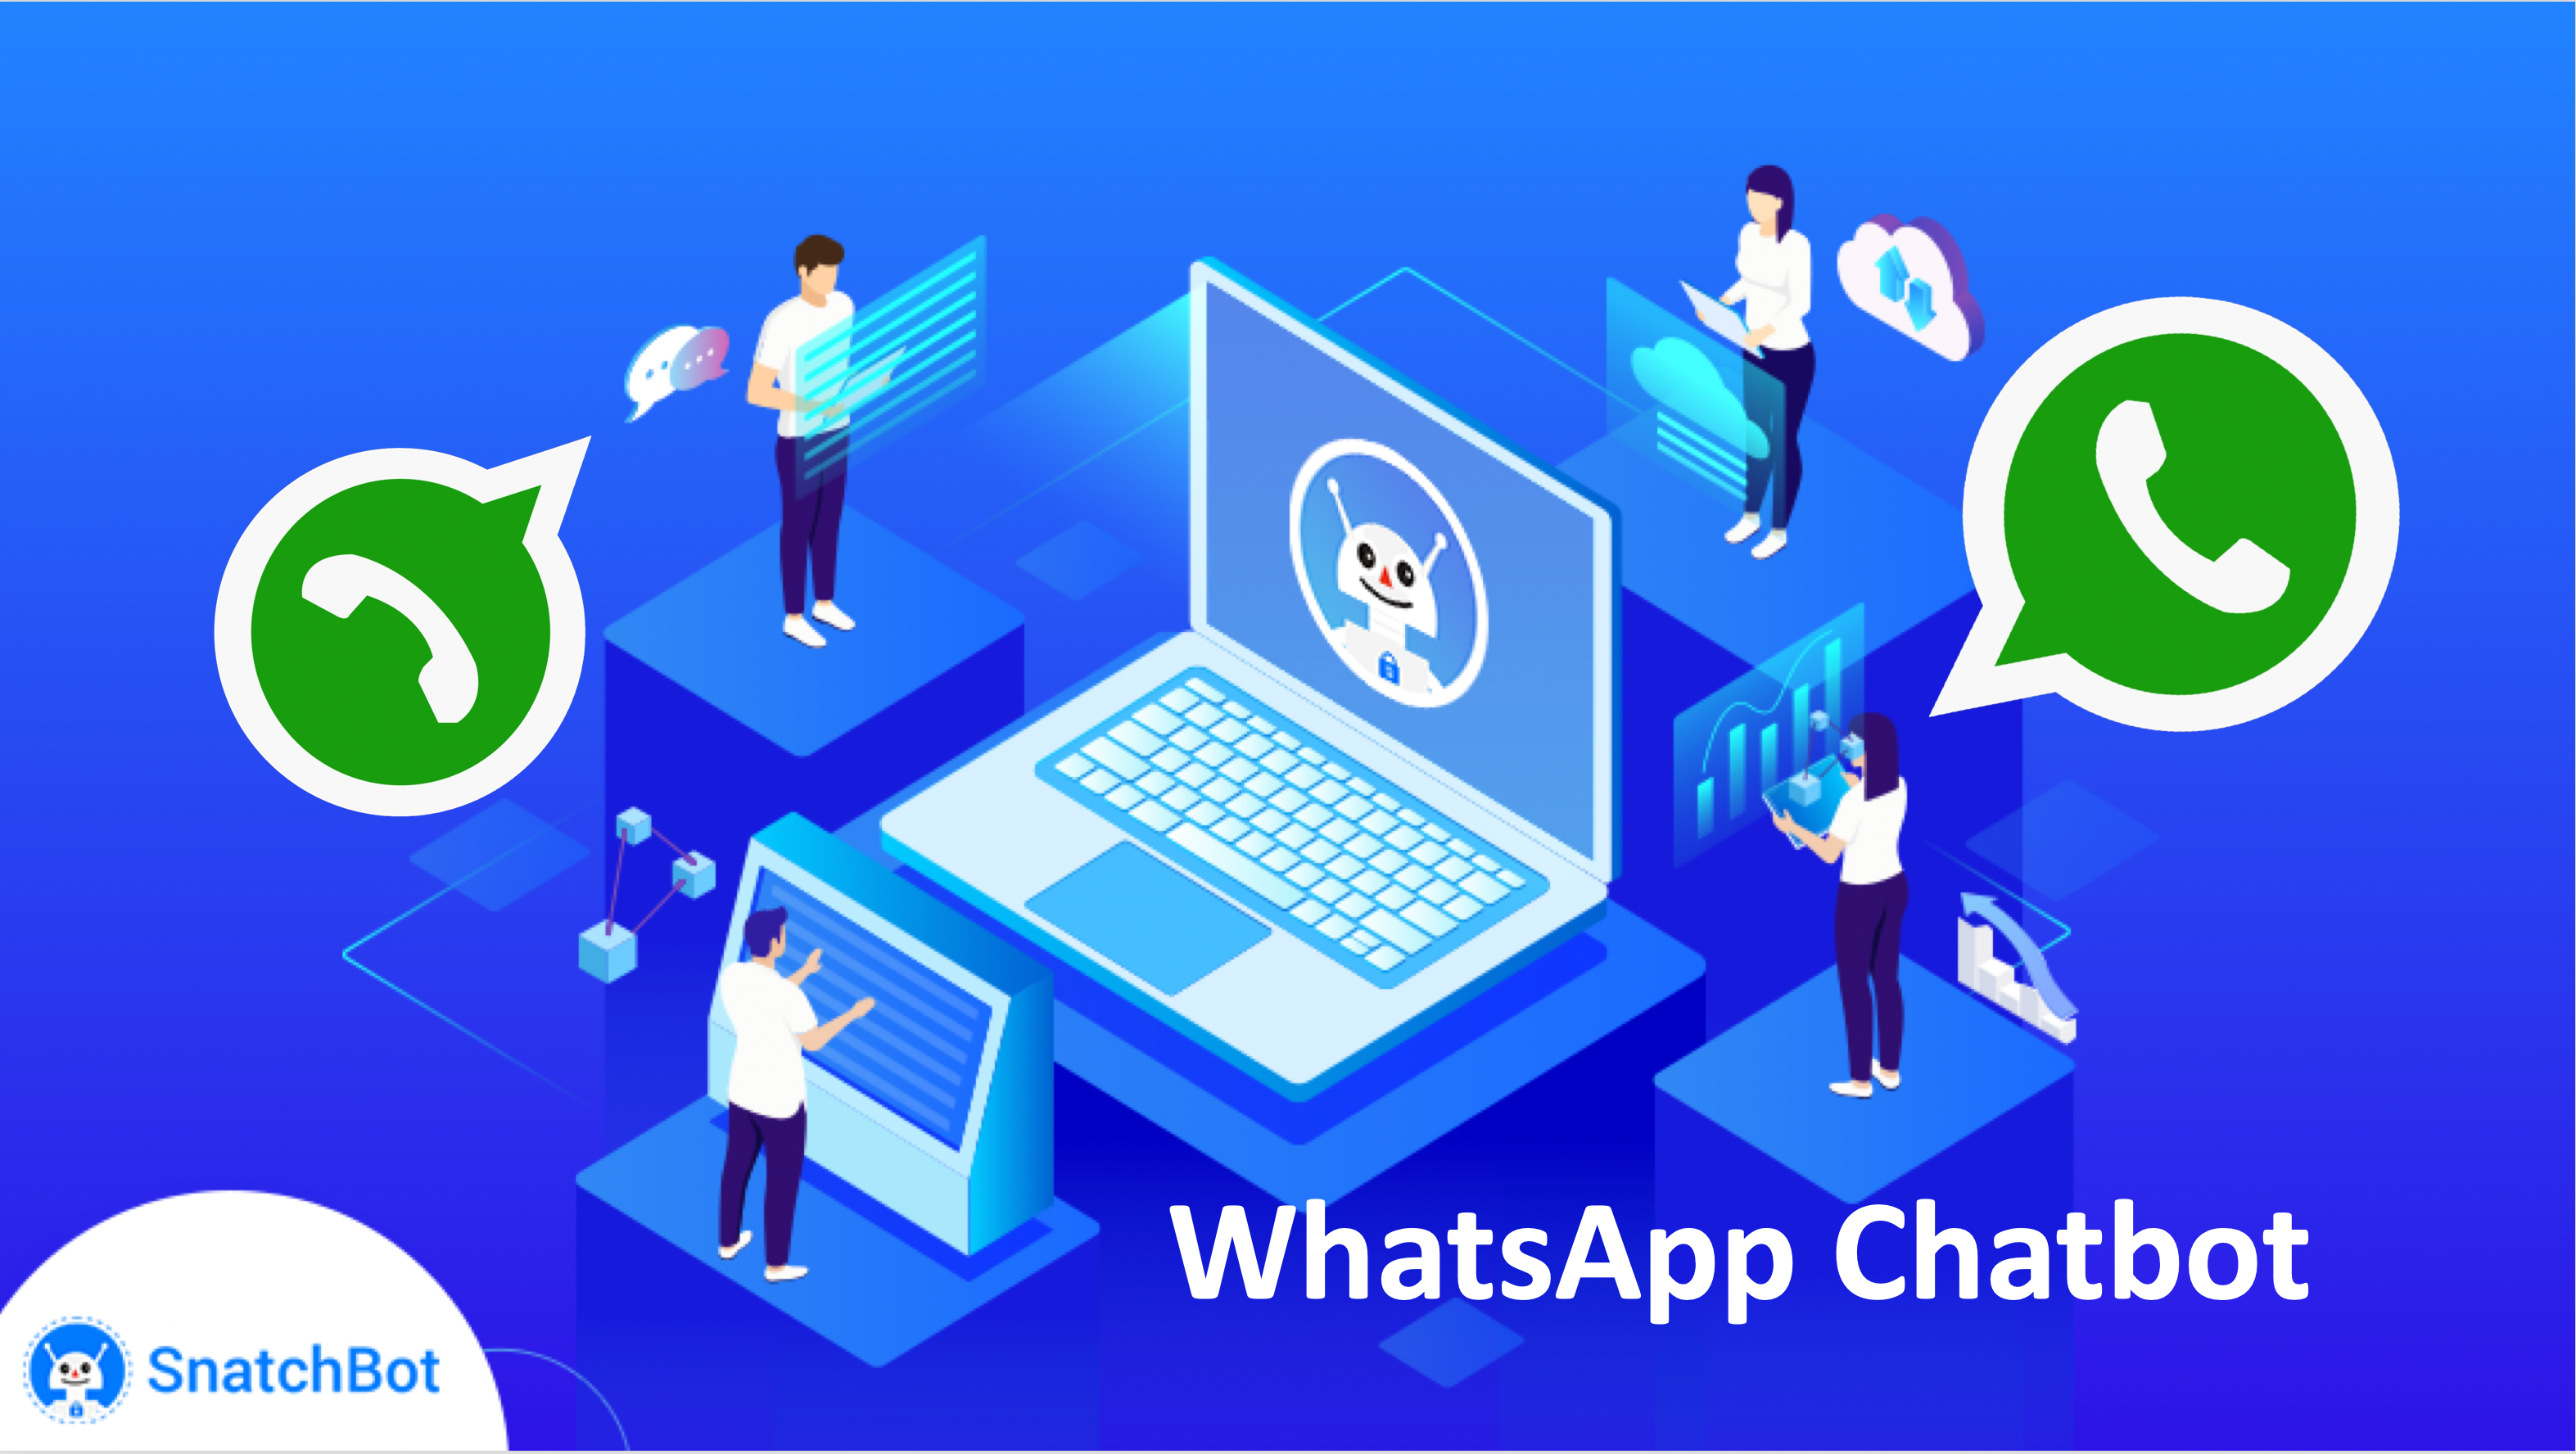 How to Design a WhatsApp Chatbot